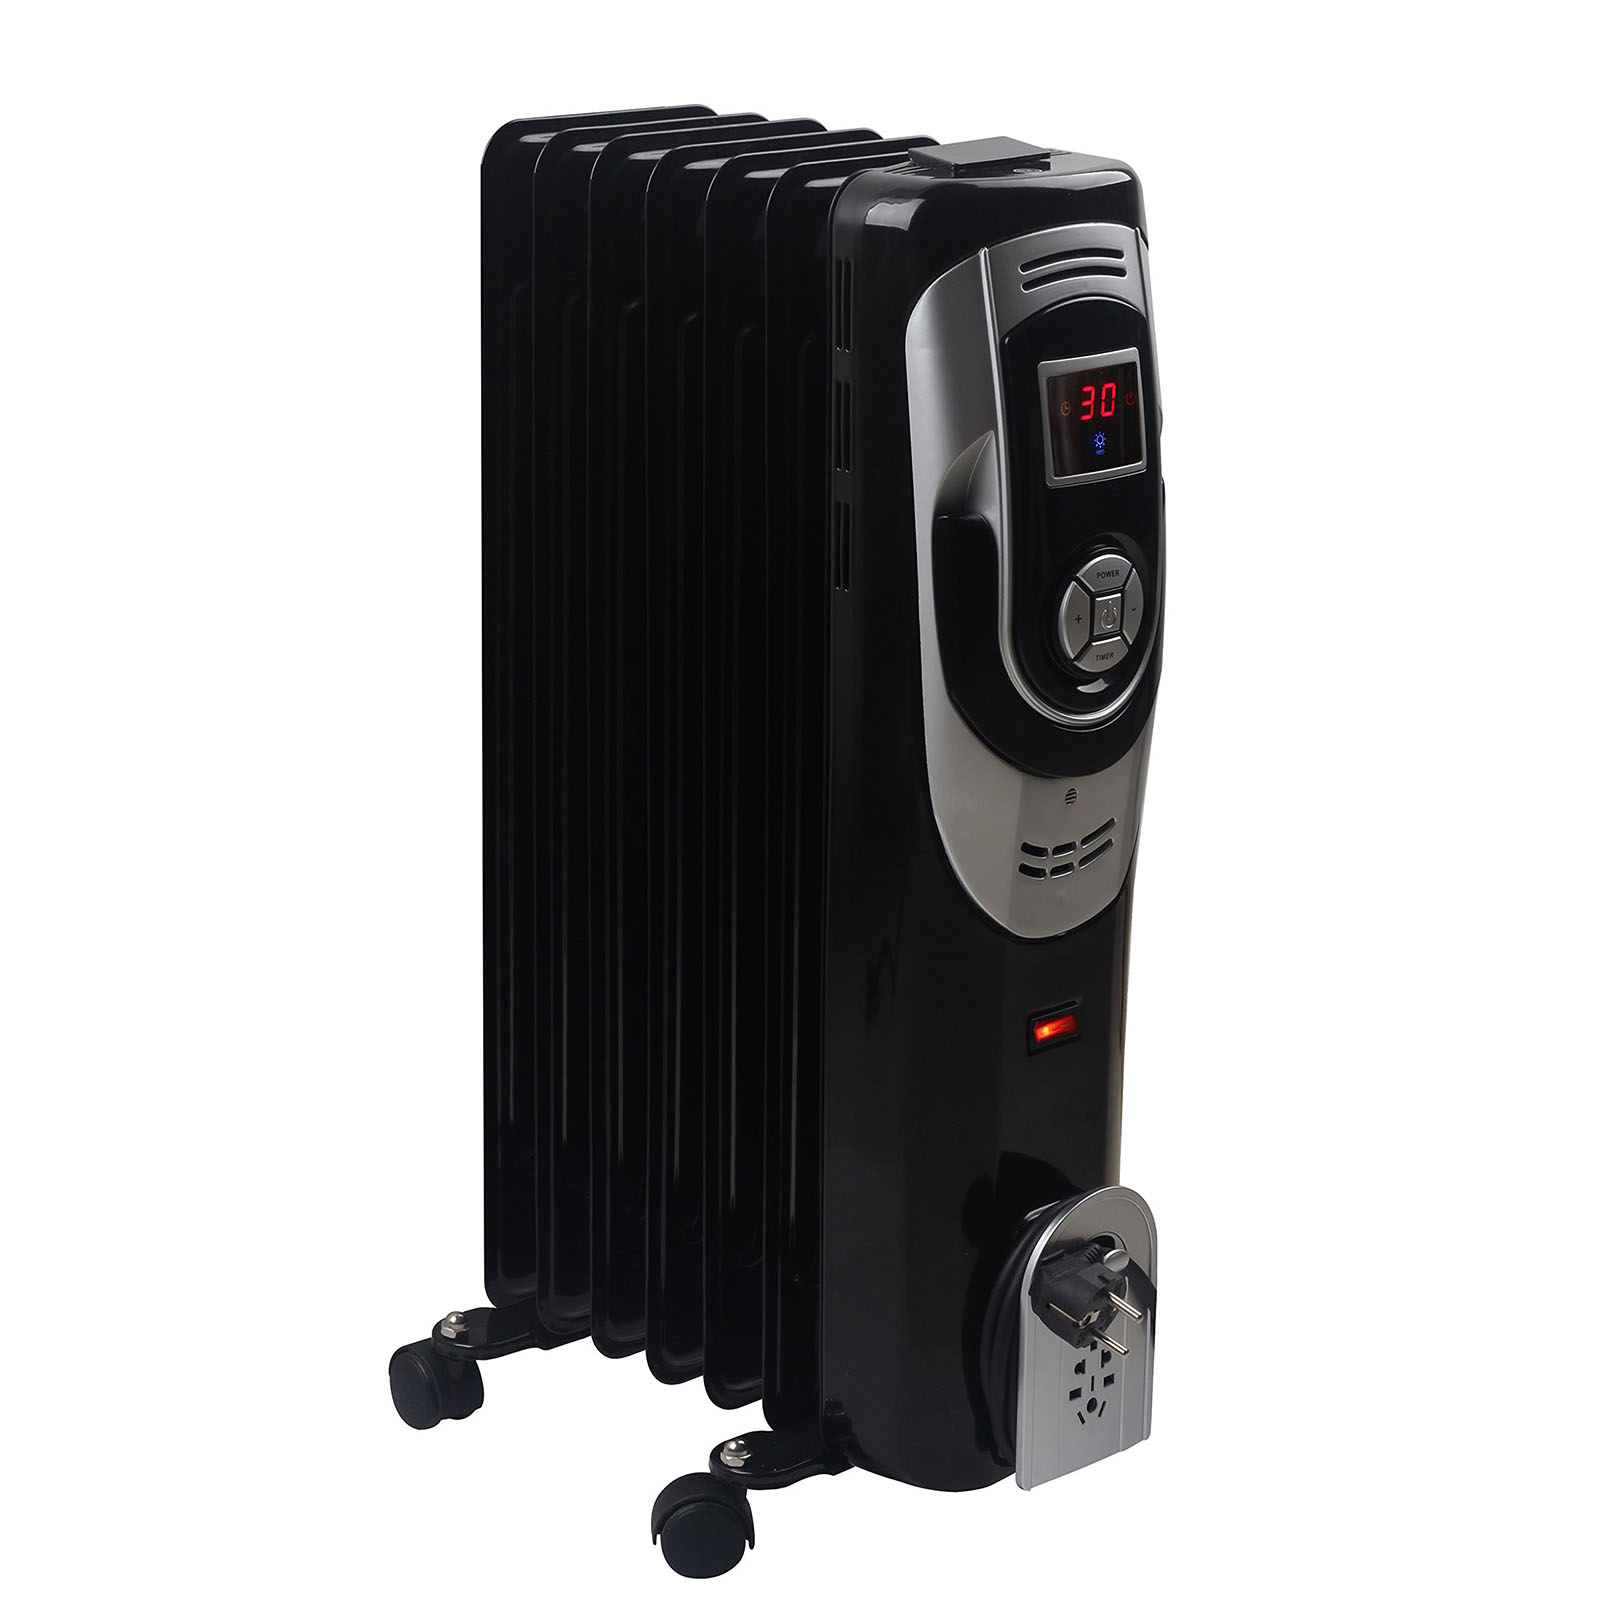 Optimus 970109383M  Digital 7 Fins Oil Filled Radiator Heater with Timer